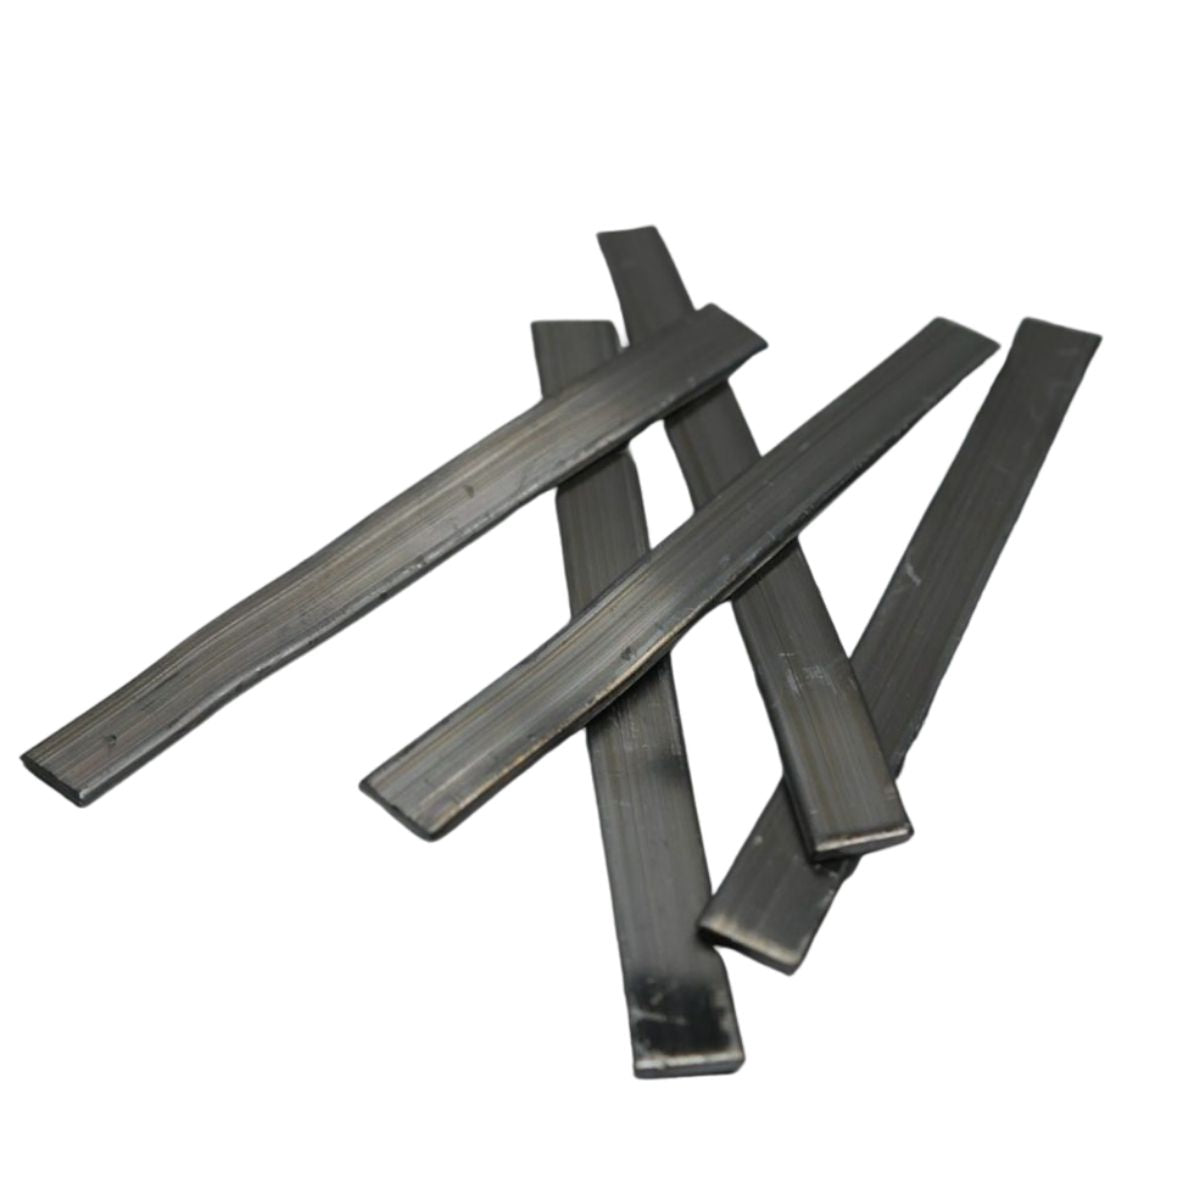 Lead Weights (Plant Anchors)